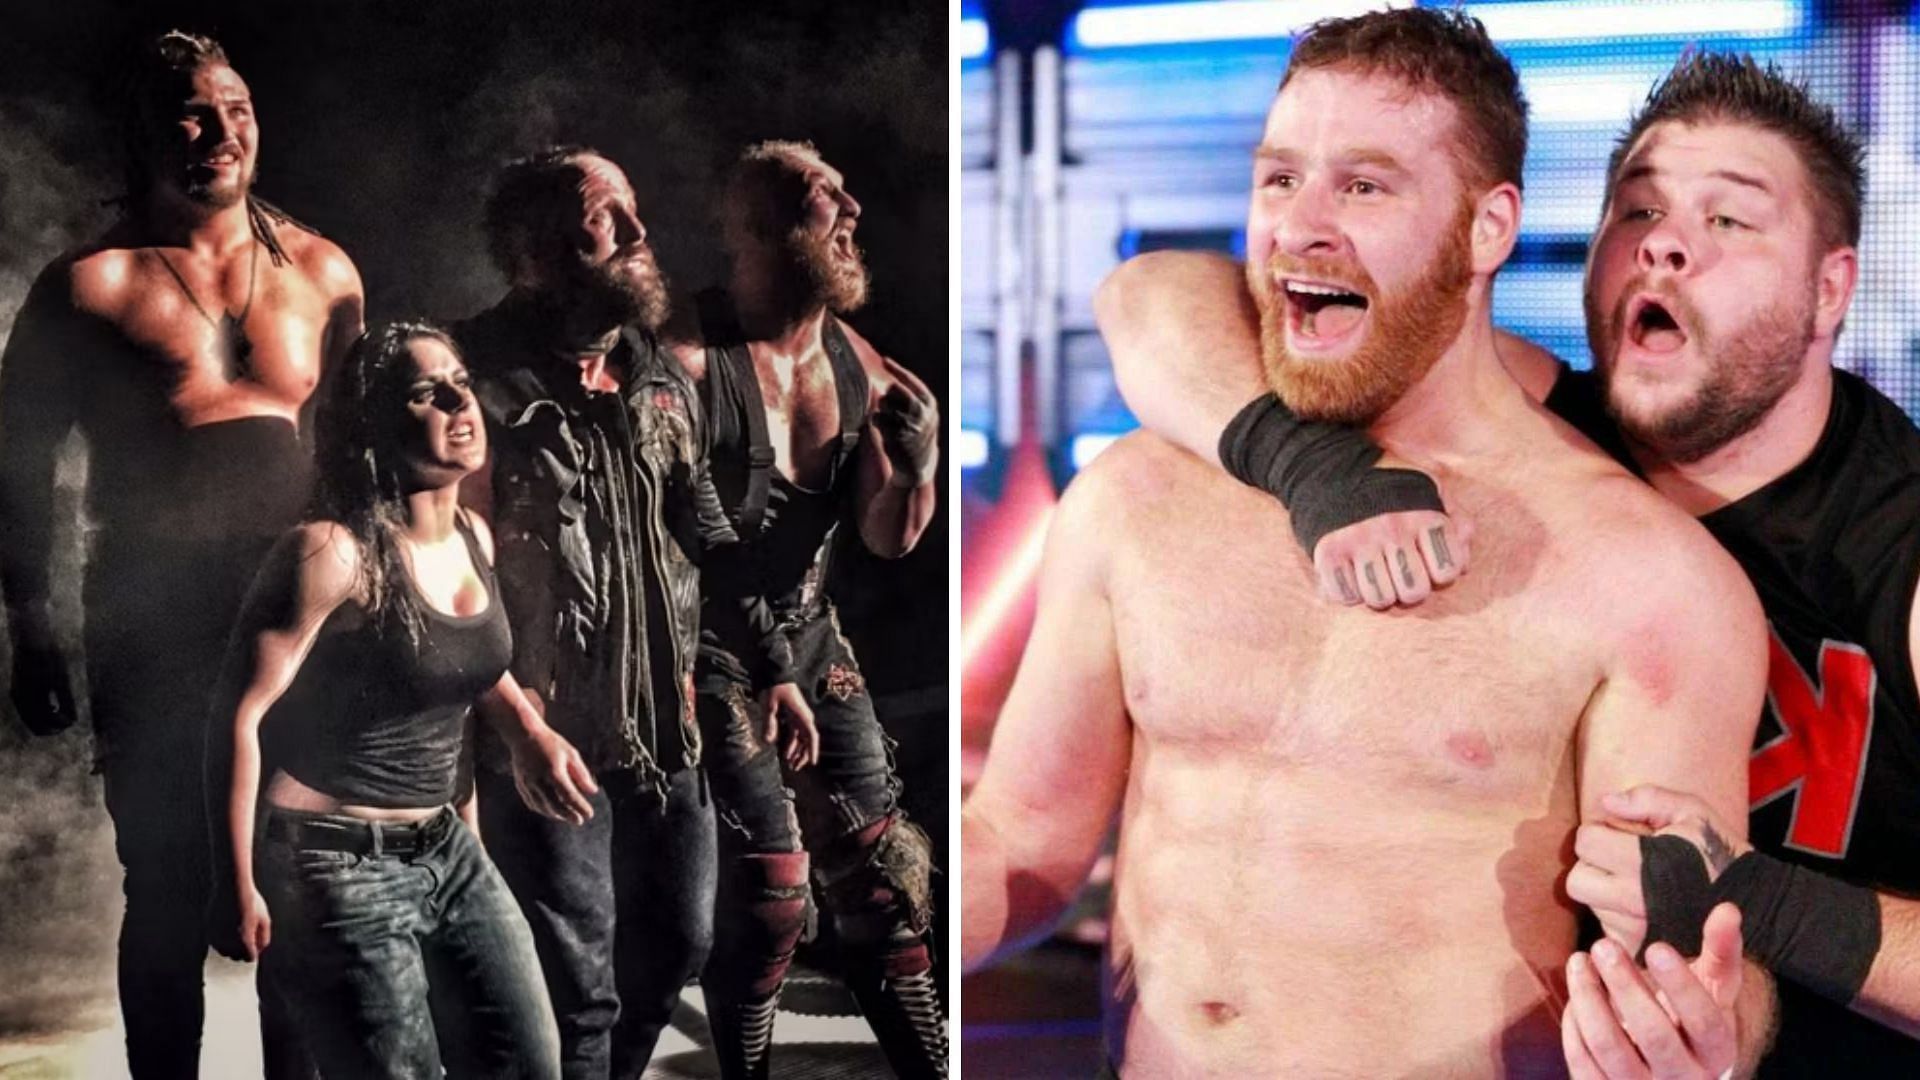 Sanity vs. Kevin Owens and Sami Zayn for the Tag Team Championships